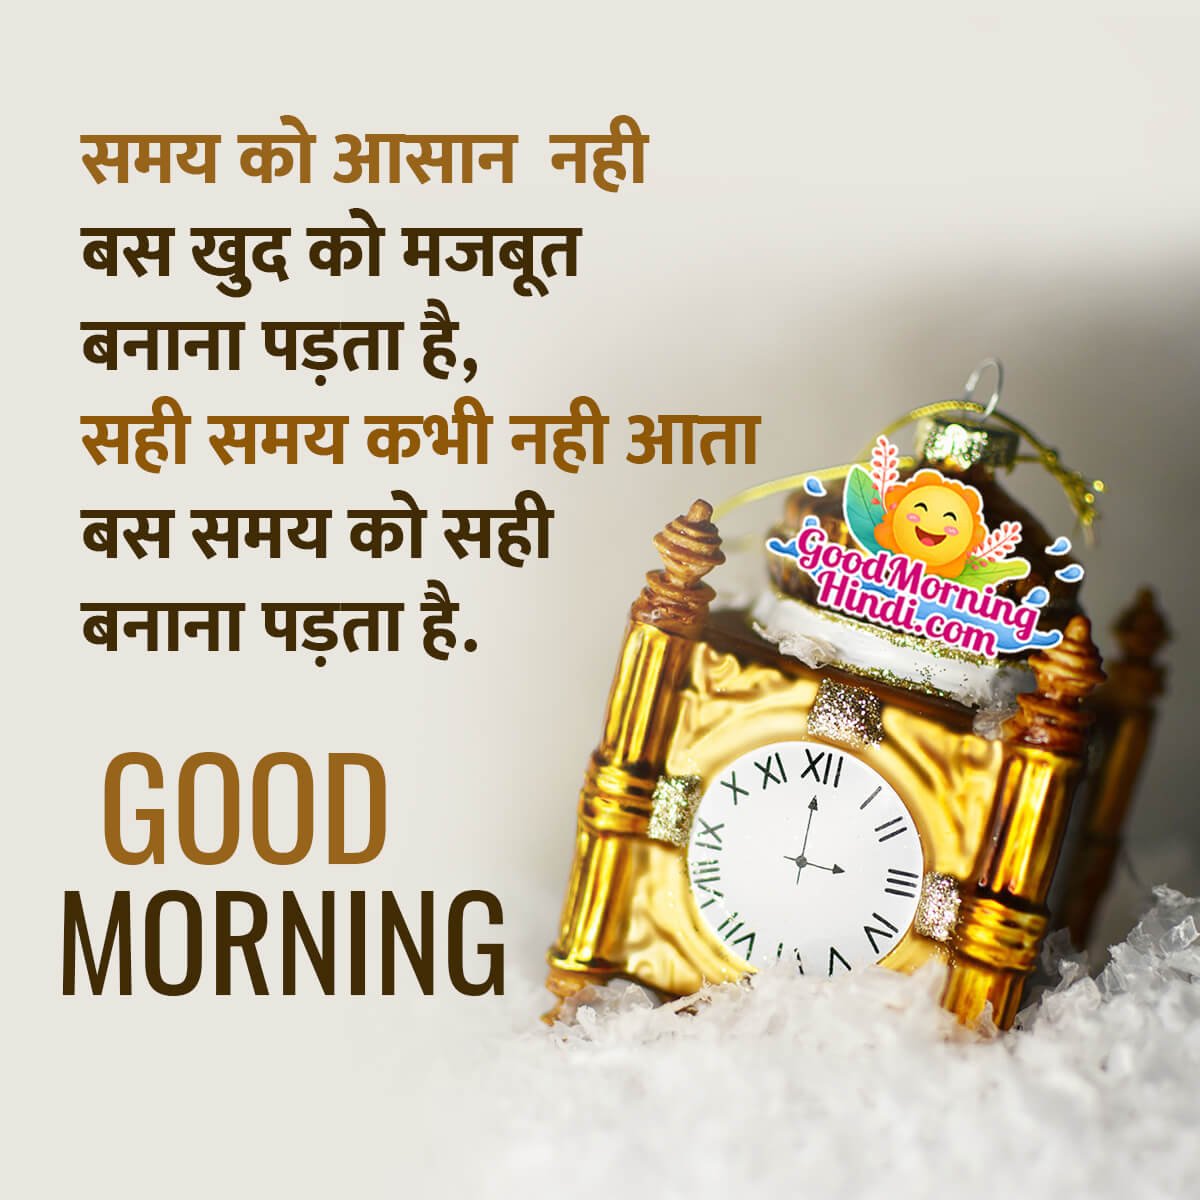 “Amazing Collection of Over 999 Good Morning Inspirational Quotes with Images in Hindi in Full 4K Resolution”